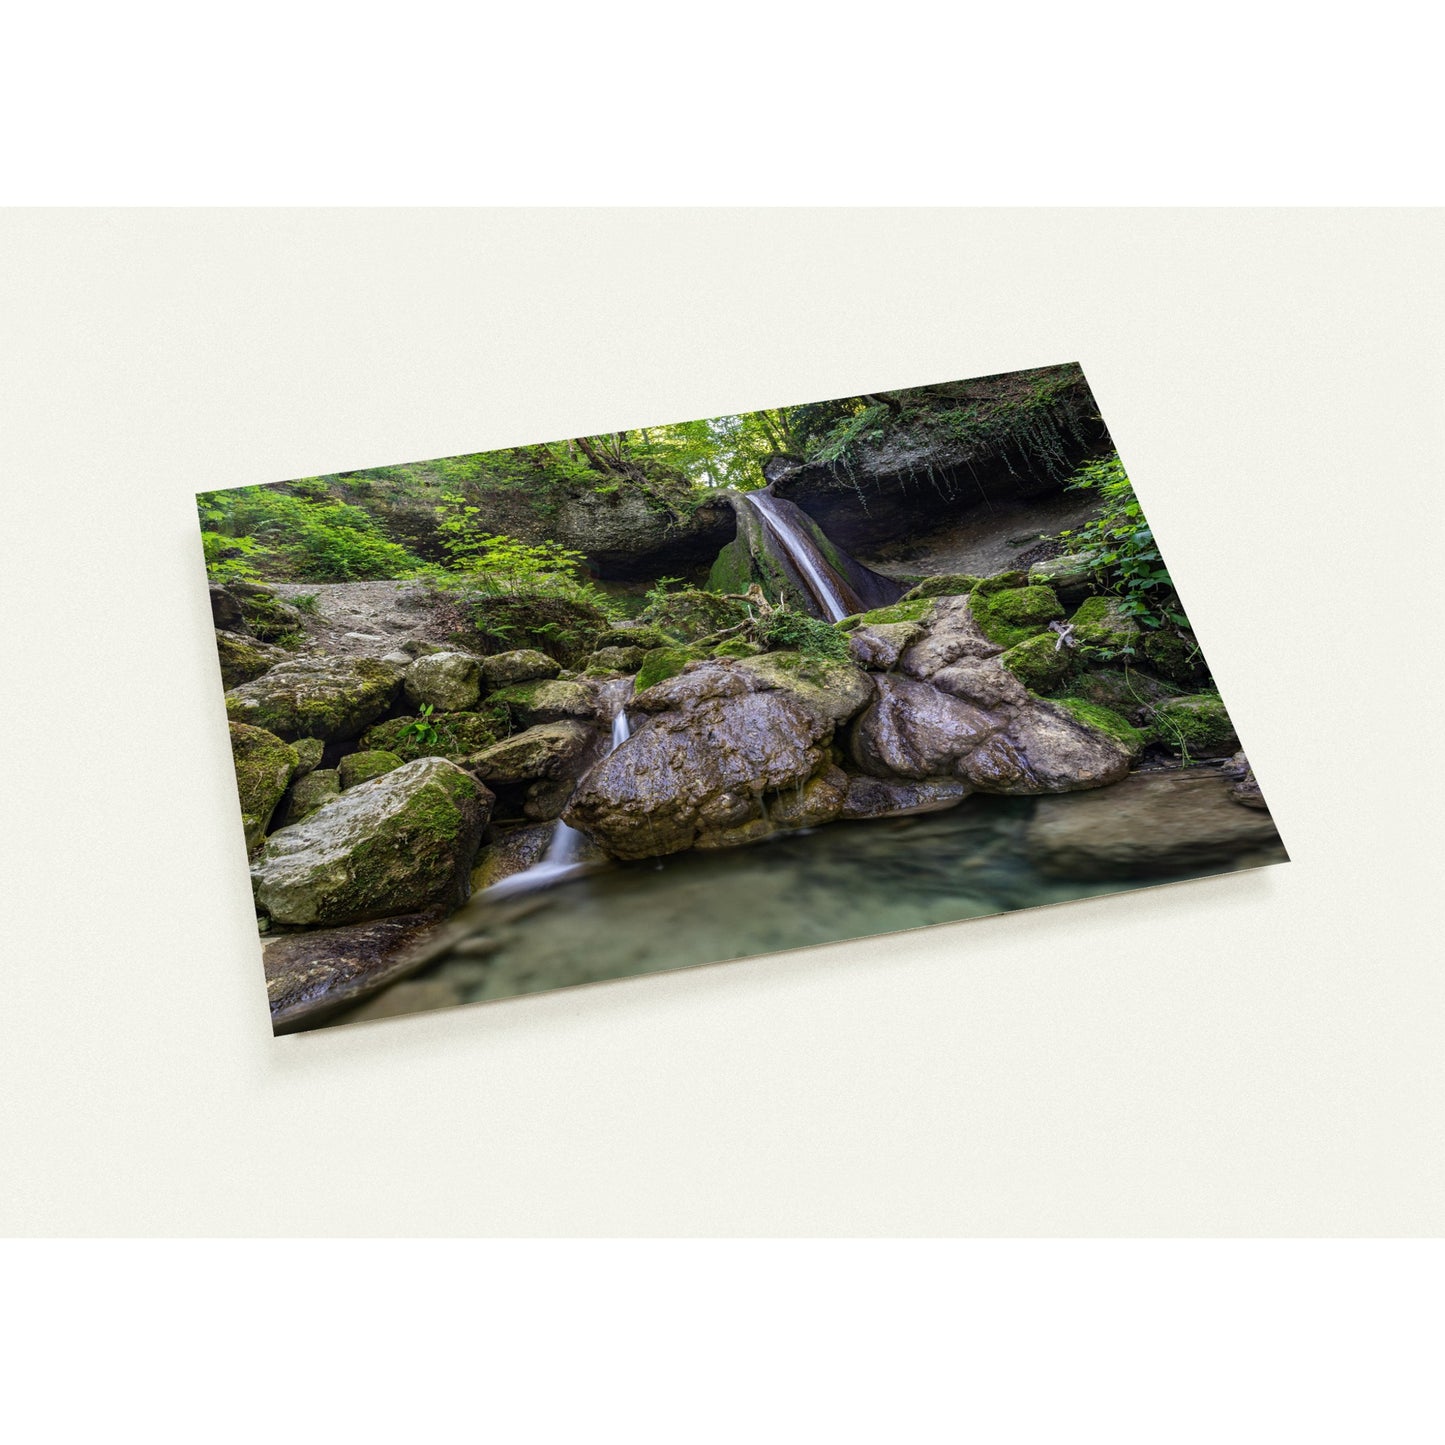 Schwarzenbach Waterfall Greeting Card Set with 10 Cards (2-Sided, with Envelopes)